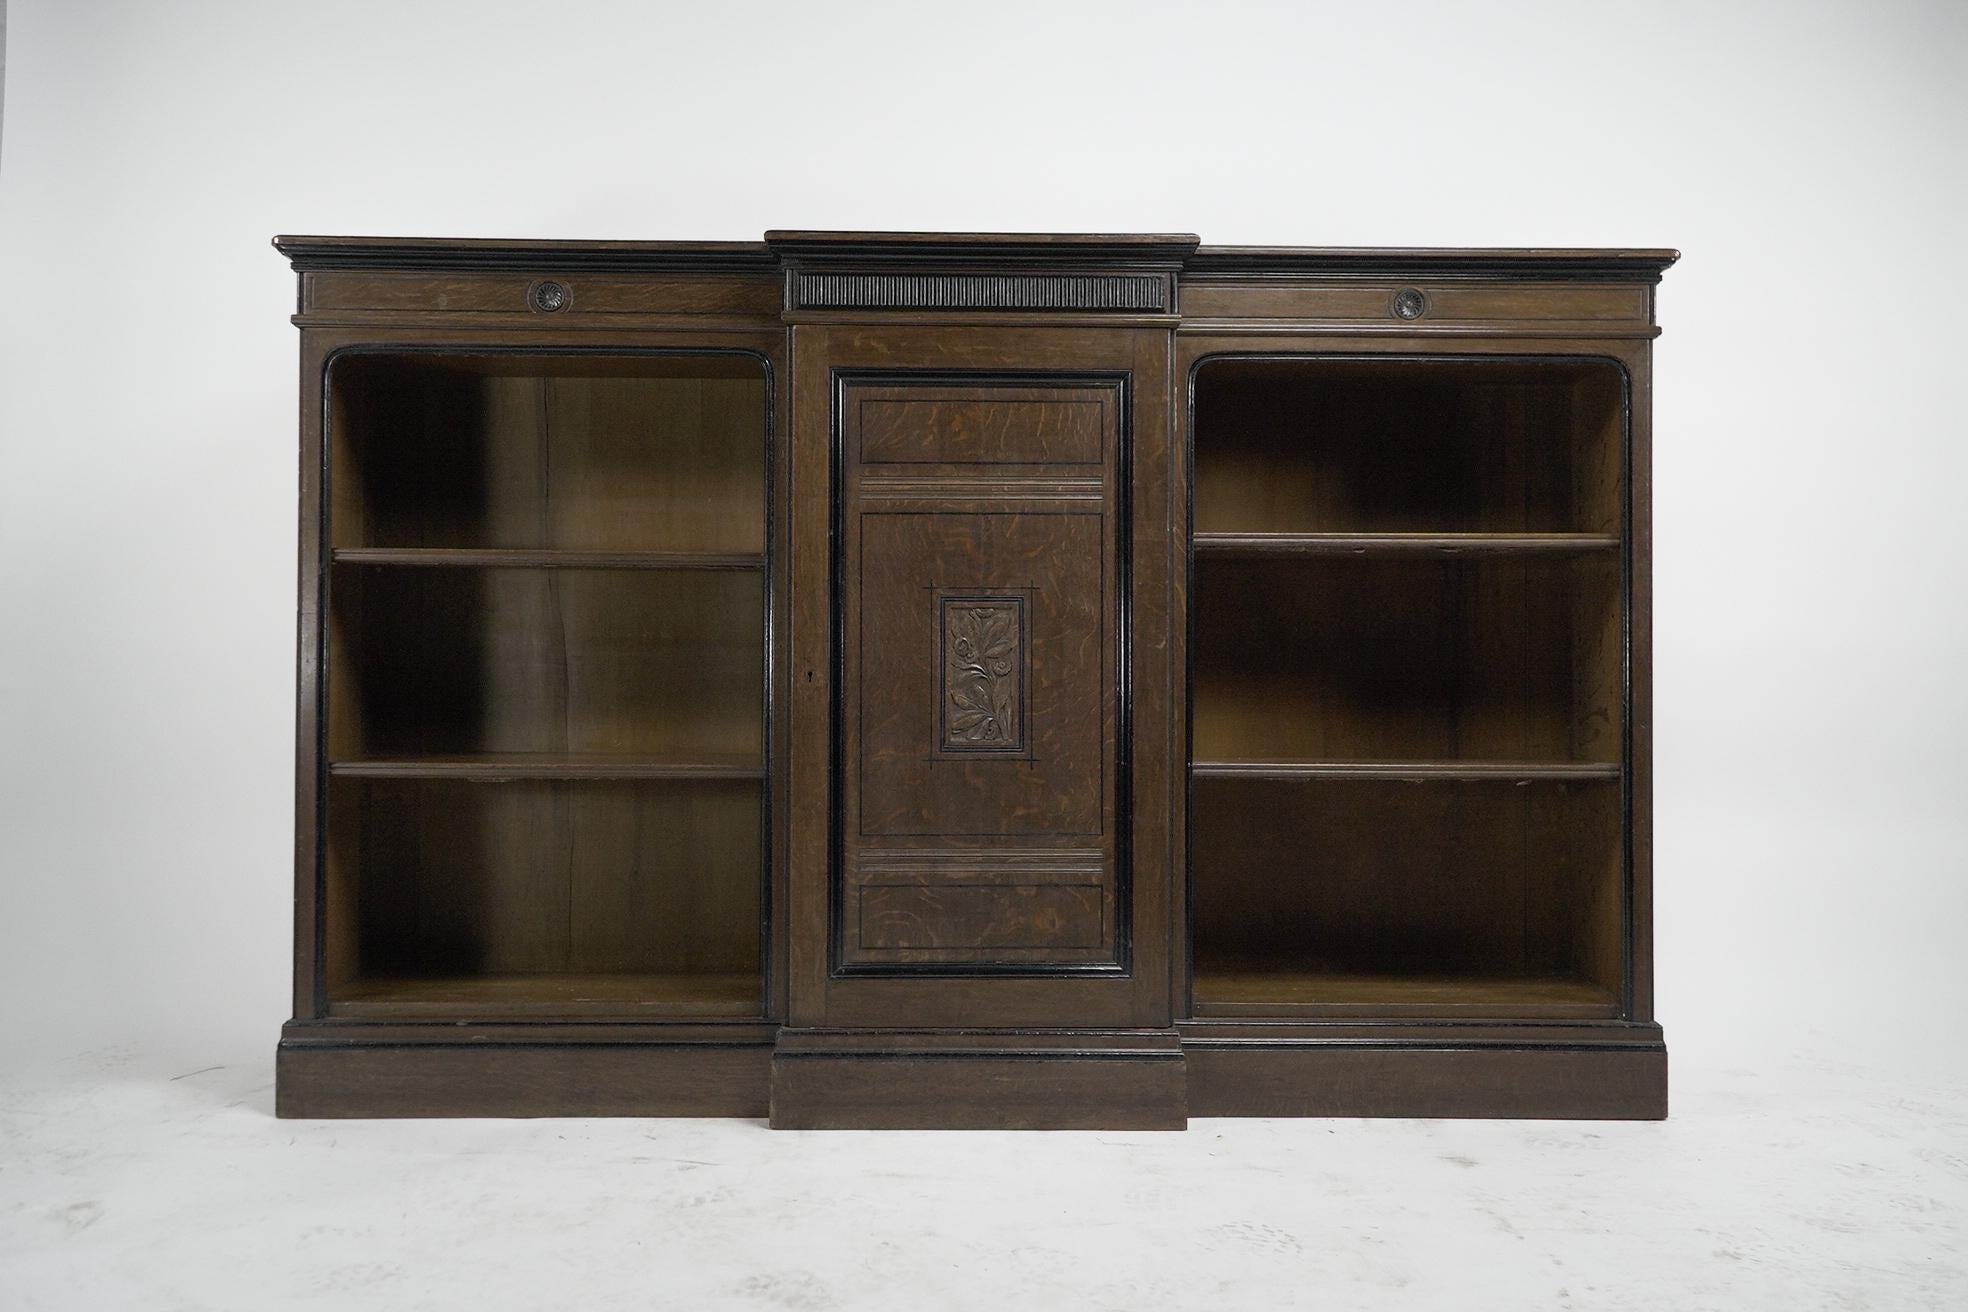 Lambs of Manchester, stamped to the brass door lock. A fine Aesthetic Movement breakfront bookcase made from quarter sawn oak with a raised back to the top and fluted decoration below the top display area, flanked by carved florets with further